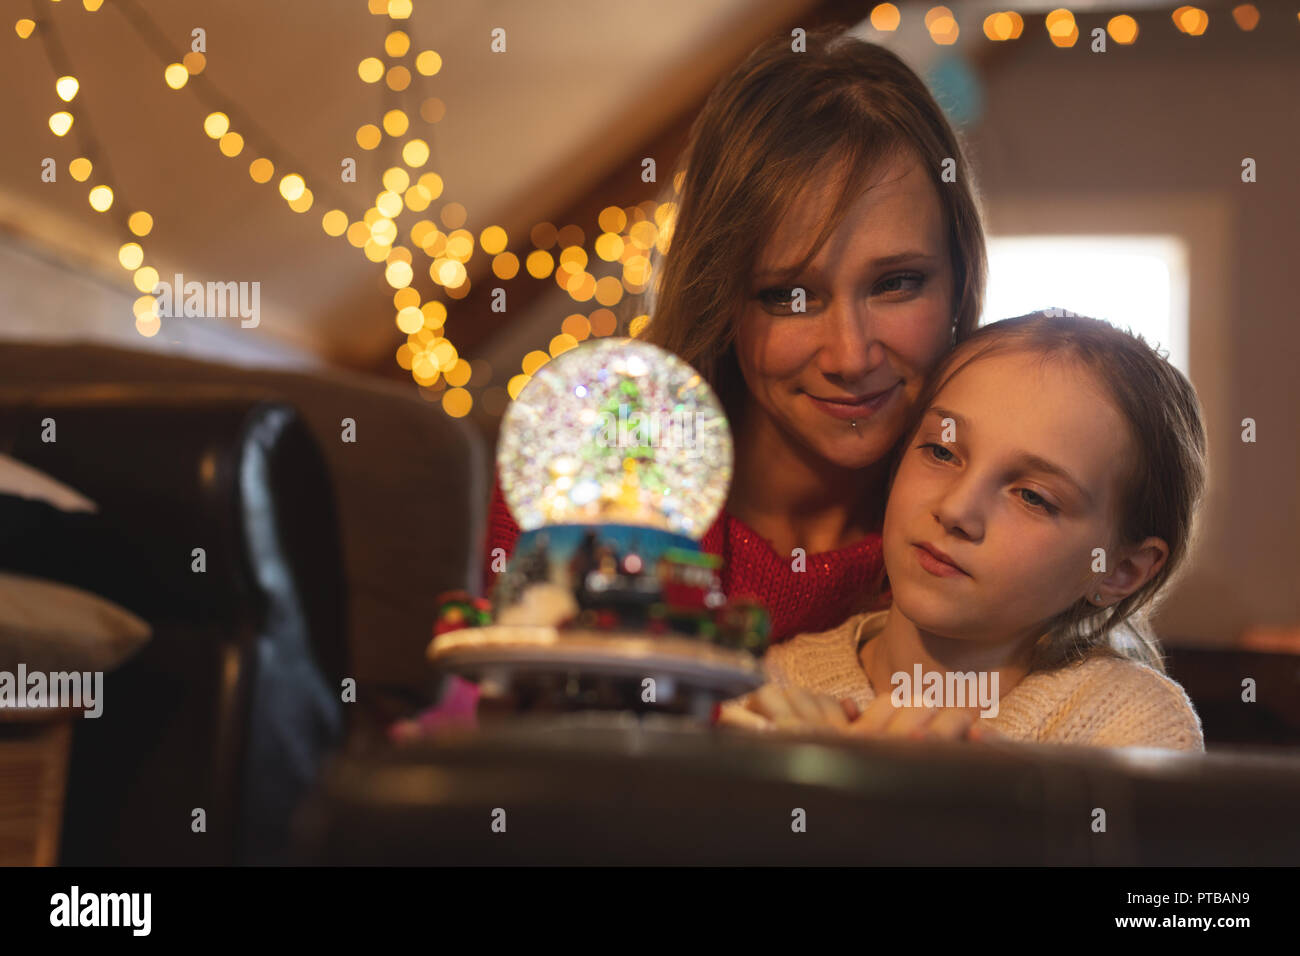 Mother and daughter looking at Christmas tree snow globe Stock Photo